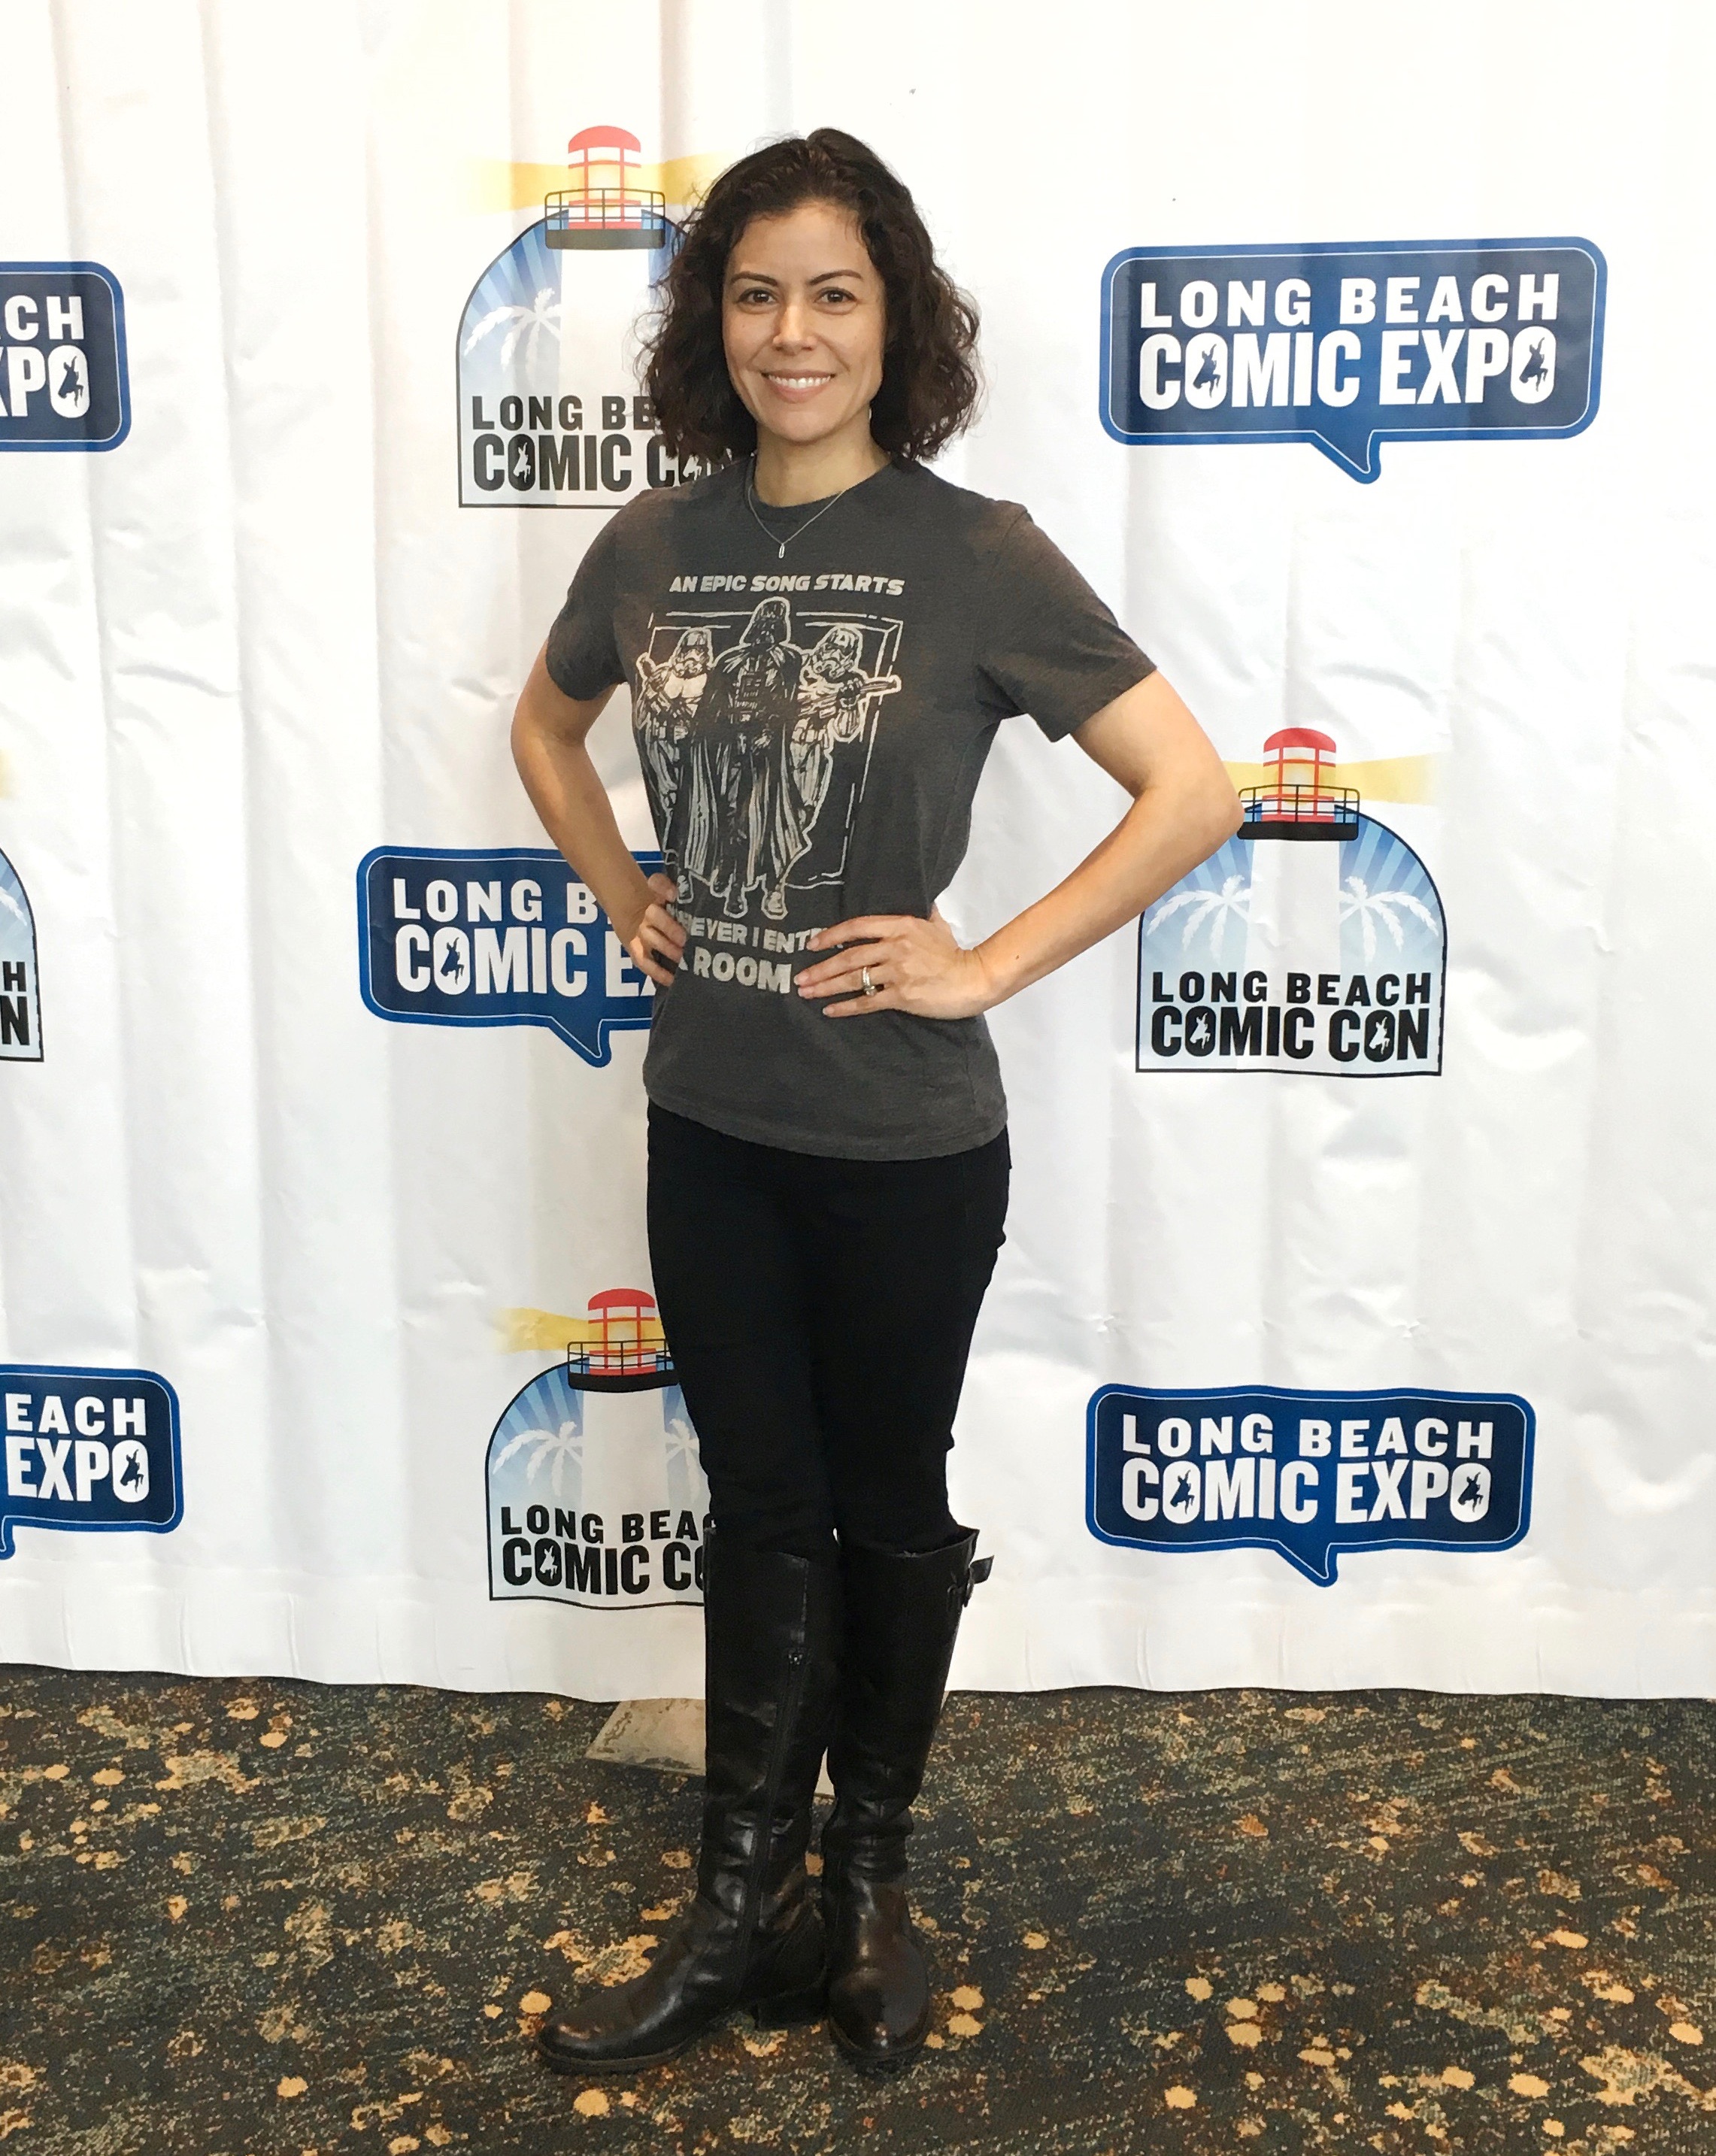 Actress Casey Dacanay attends the Long Beach Comic Convention on February 17, 2018